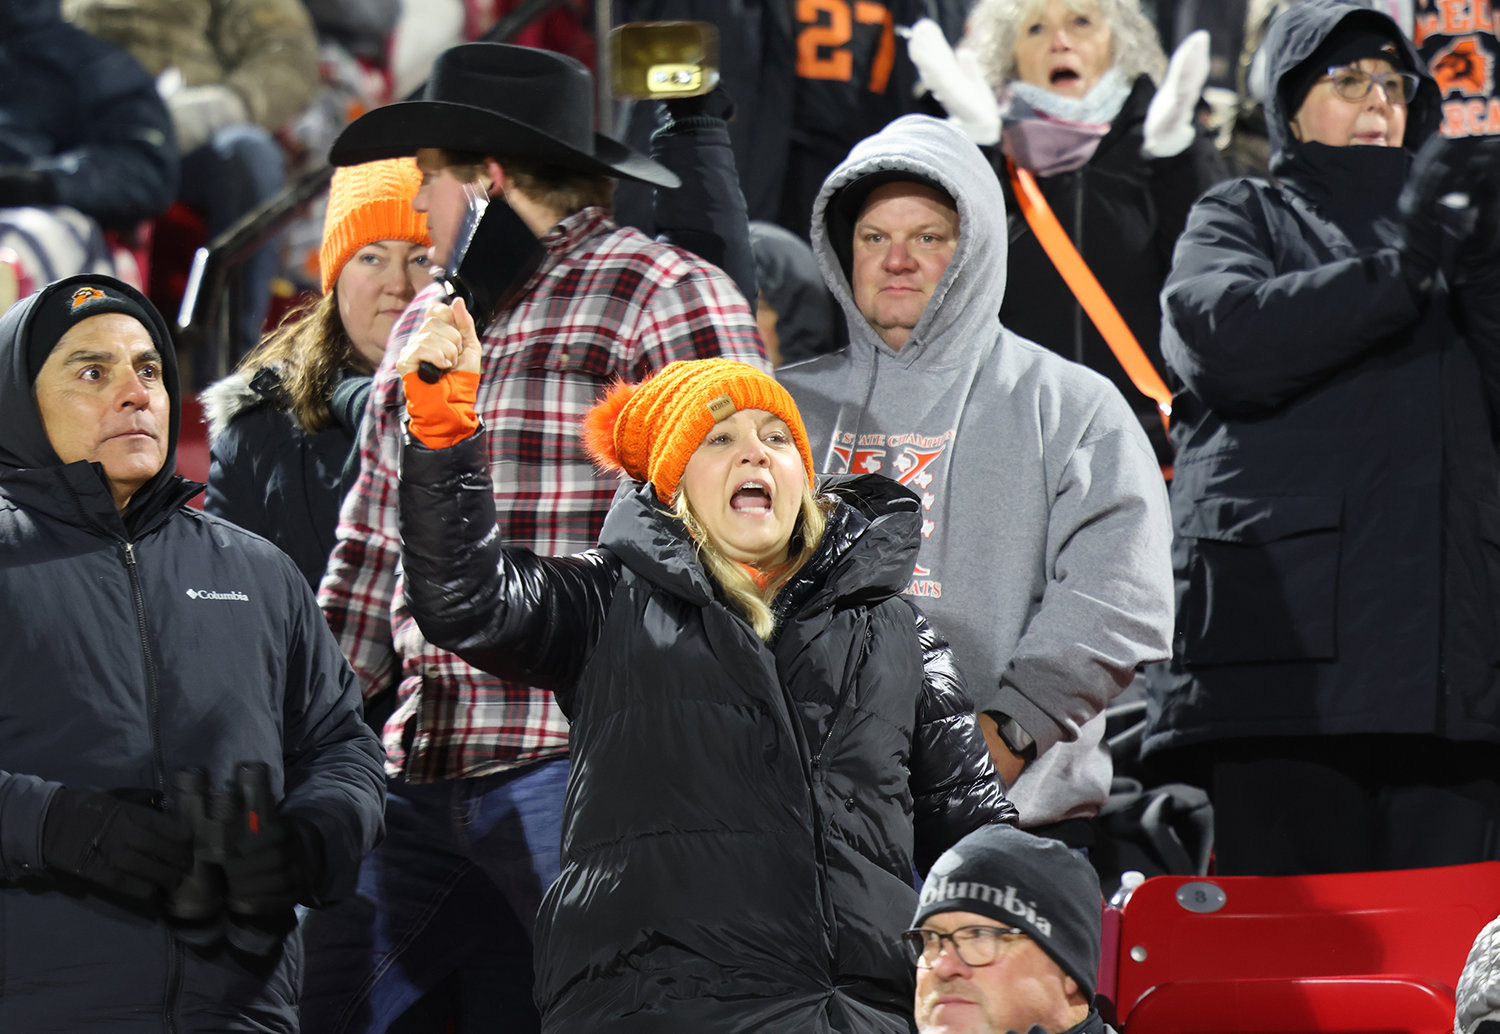 Aledo's loyal fans bundled up for the chilly but victorious game.